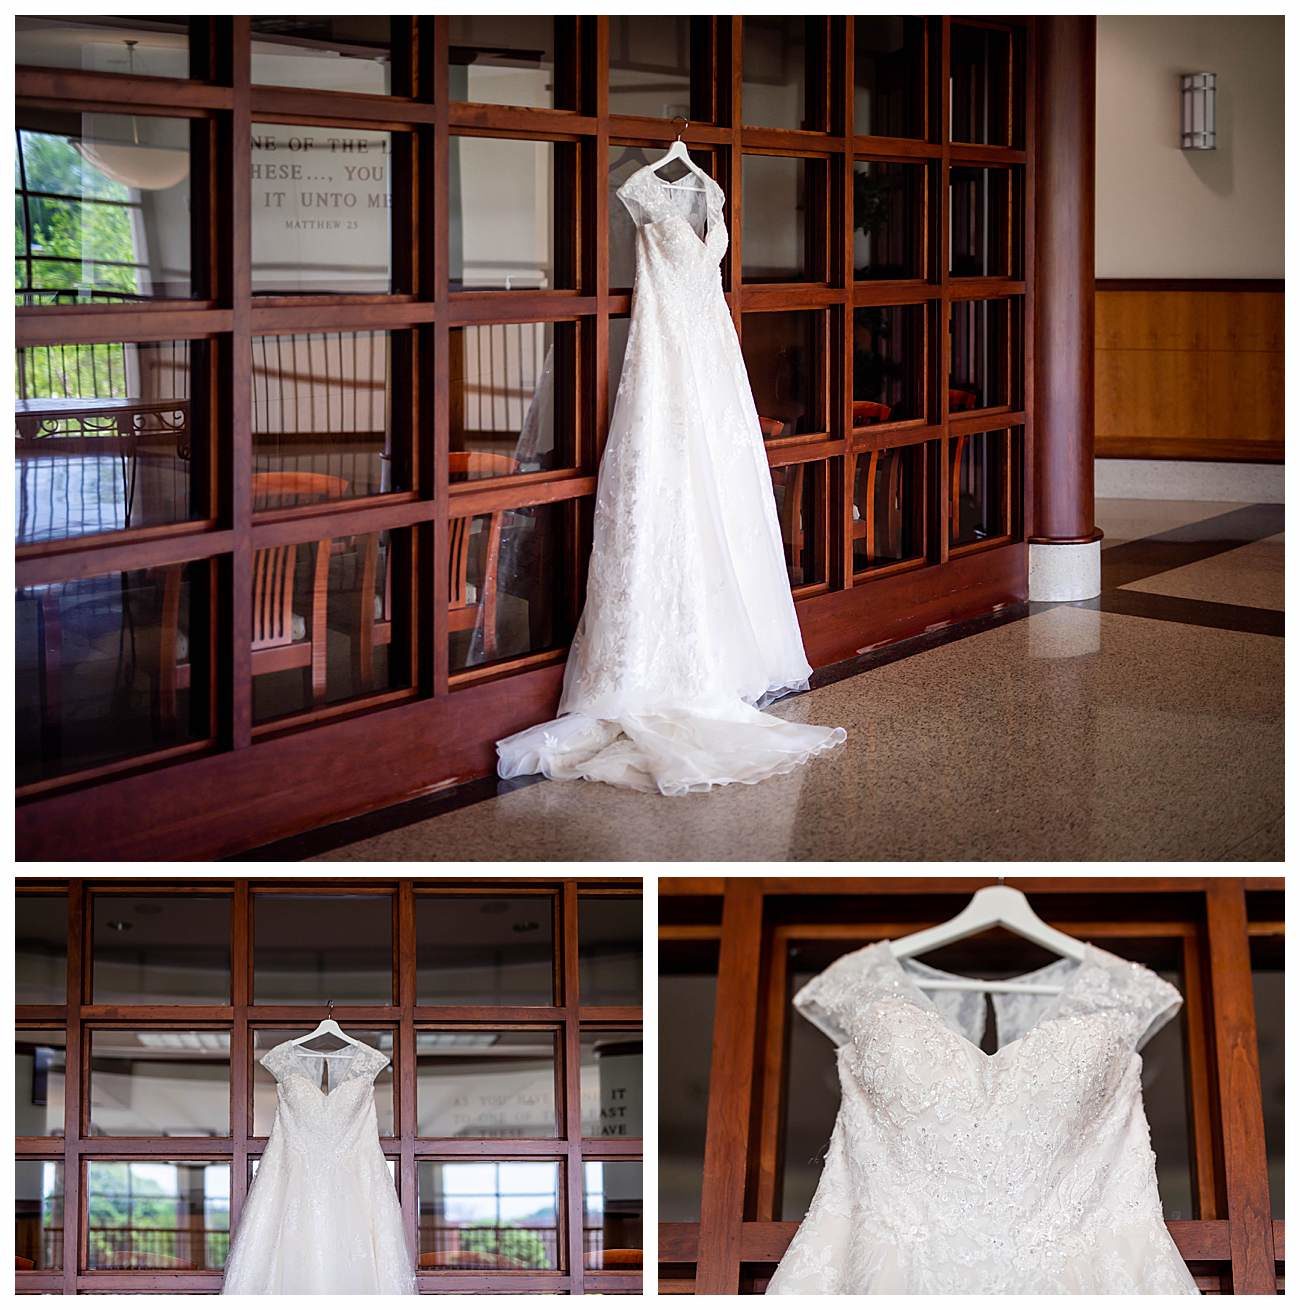 capped sleeve lace wedding dress hanging in window